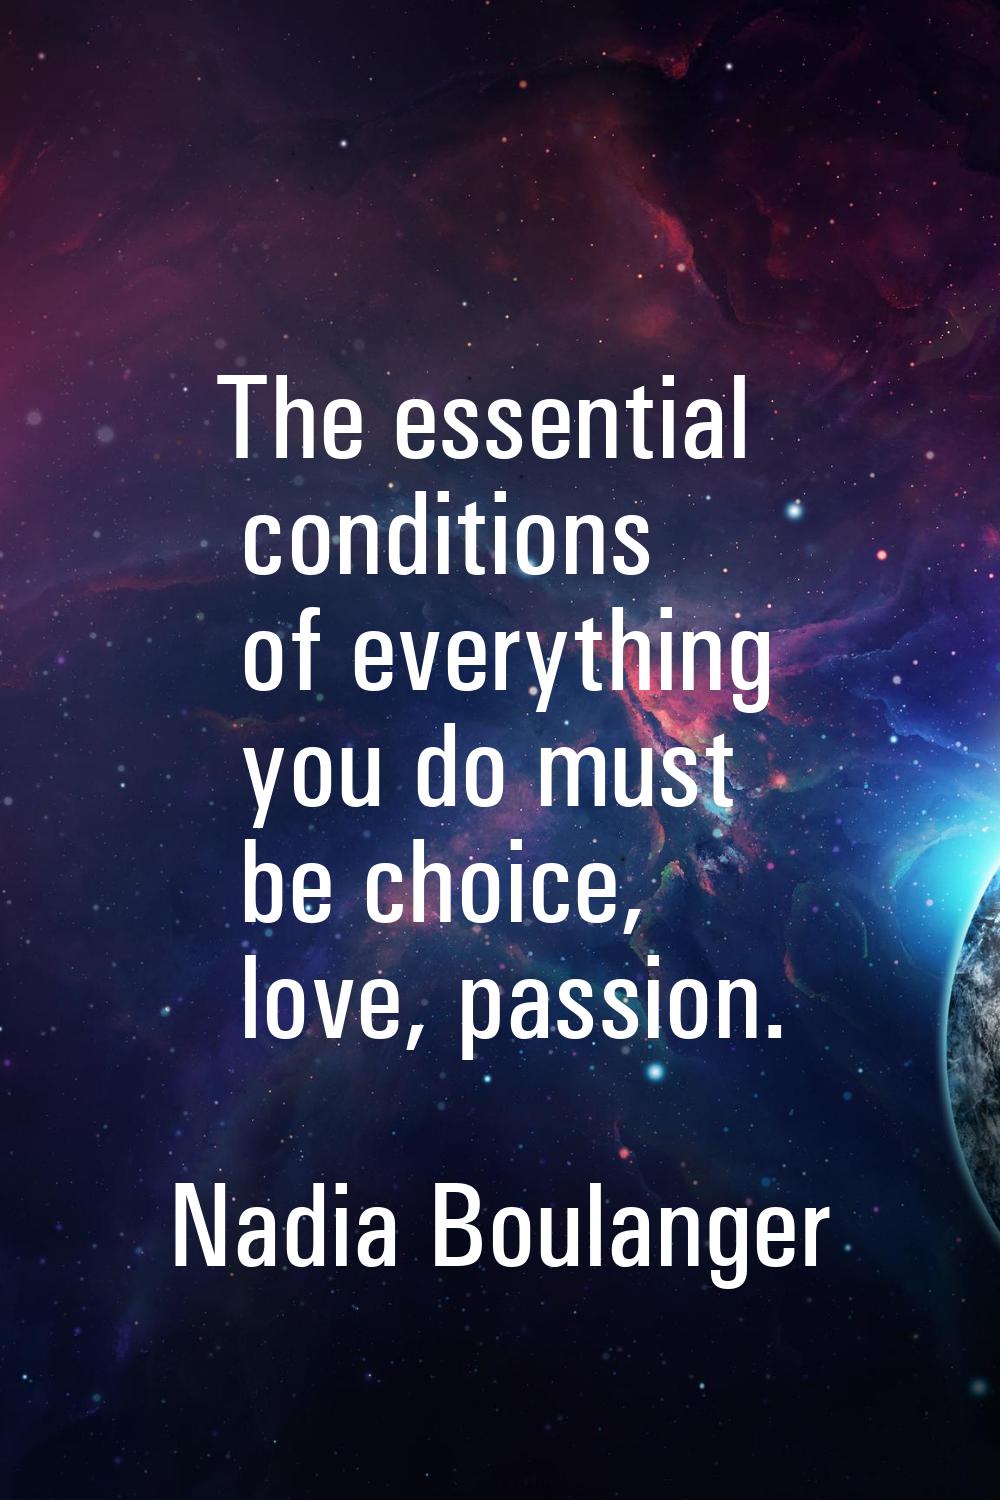 The essential conditions of everything you do must be choice, love, passion.